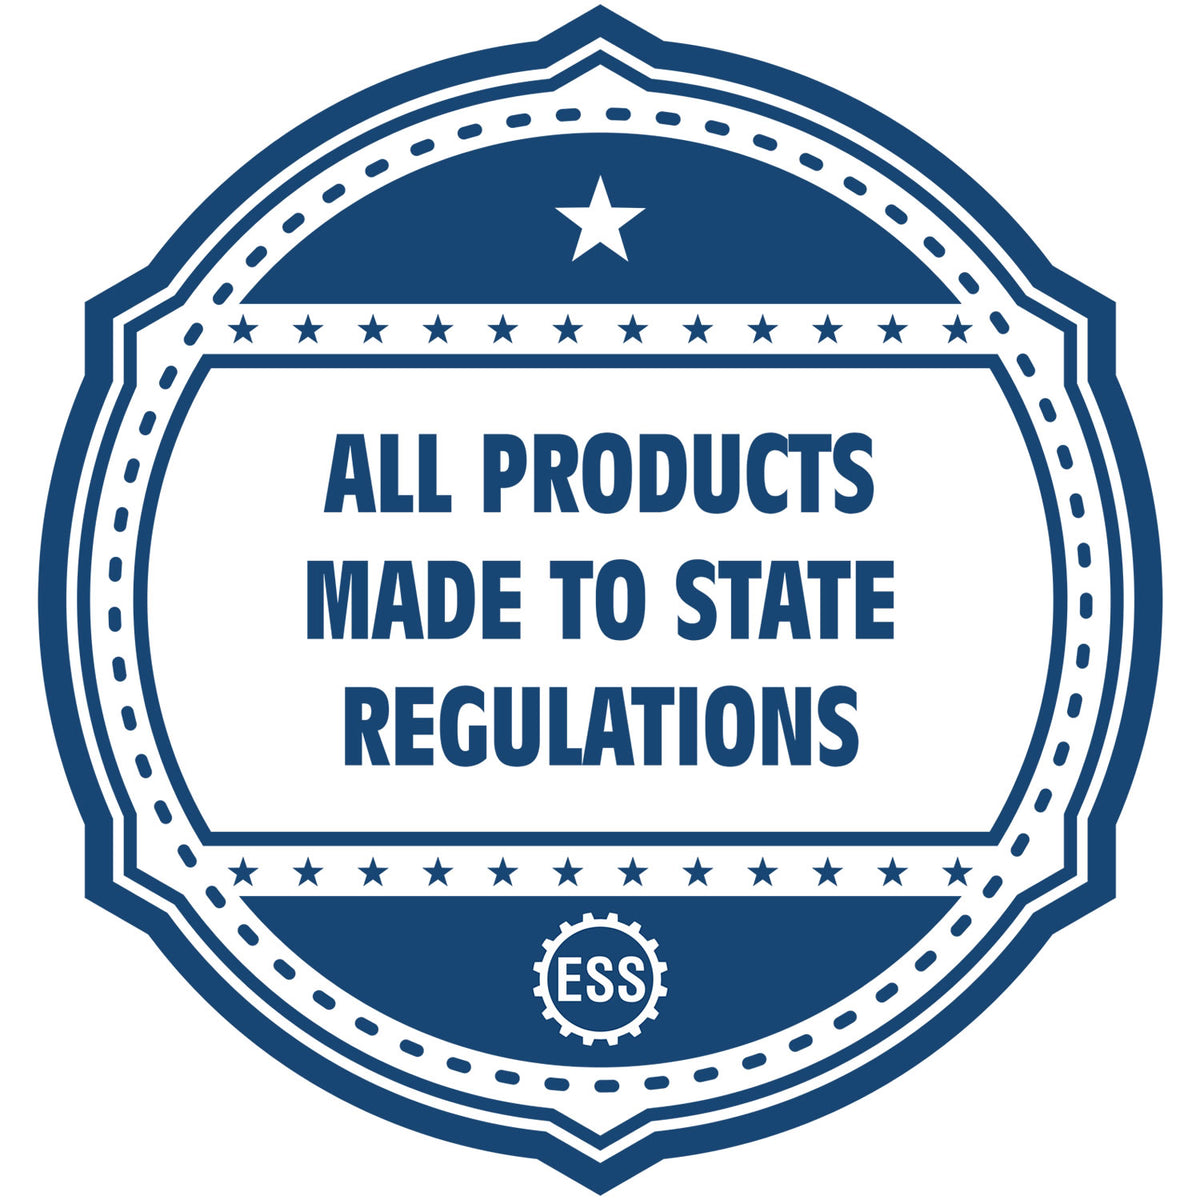 A blue icon or badge for the State of Colorado Extended Long Reach Geologist Seal showing that this product is made in compliance with state regulations.